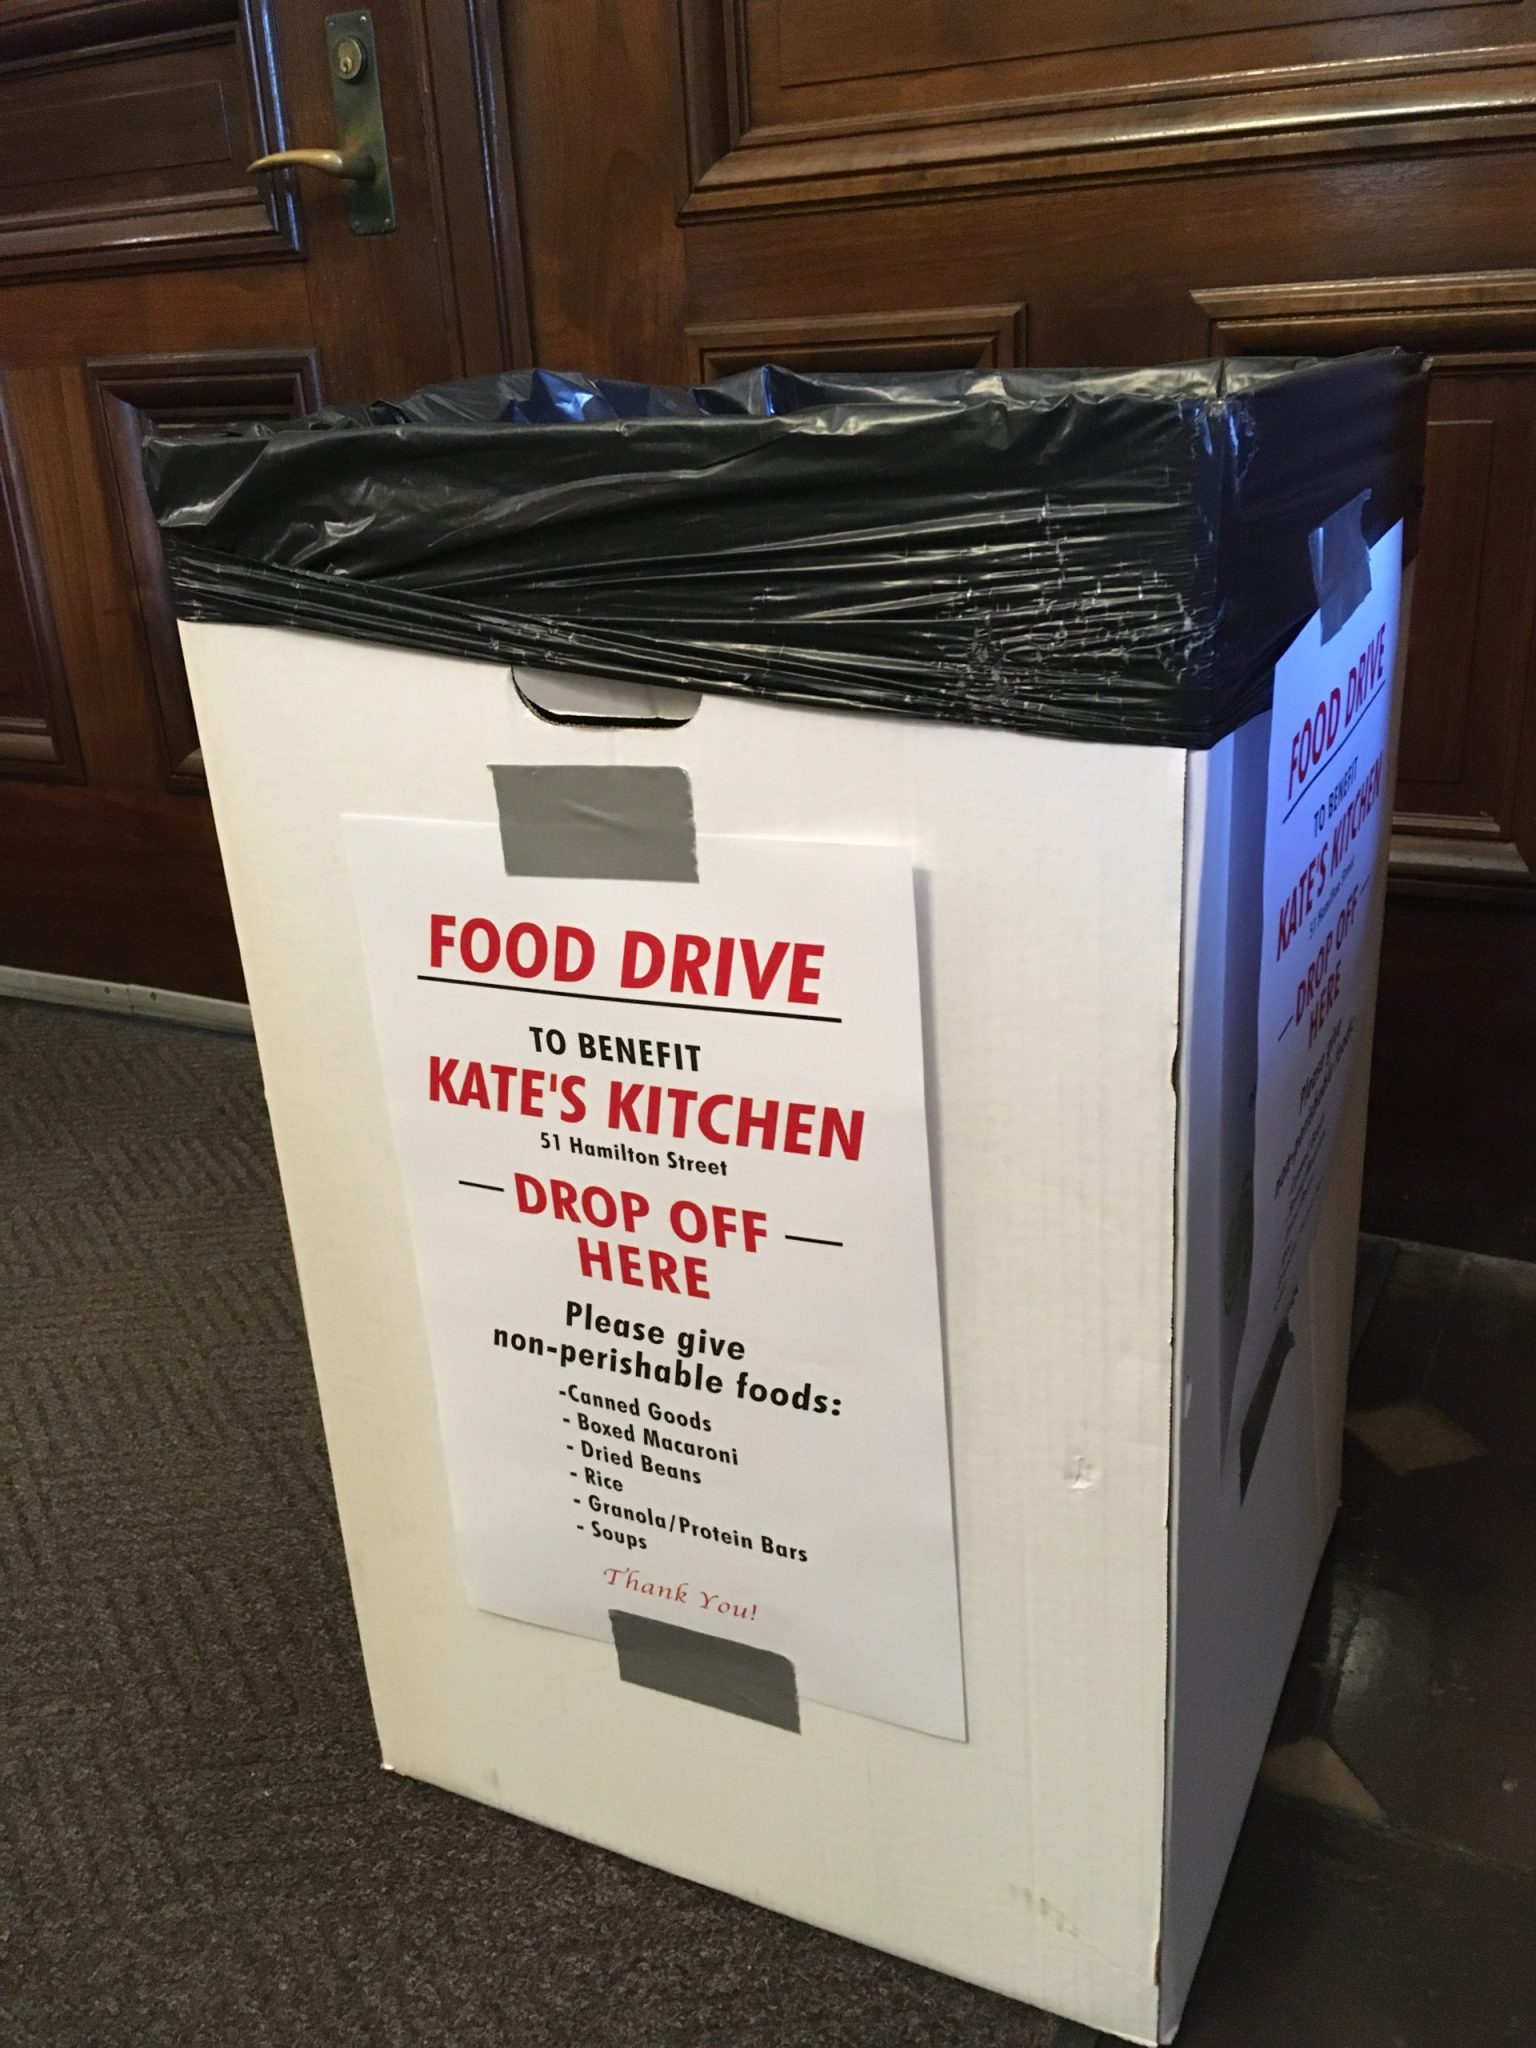 2022 Food Drive Kates Kitchen Collection Box Scaled E1668794156454 1536x2048 